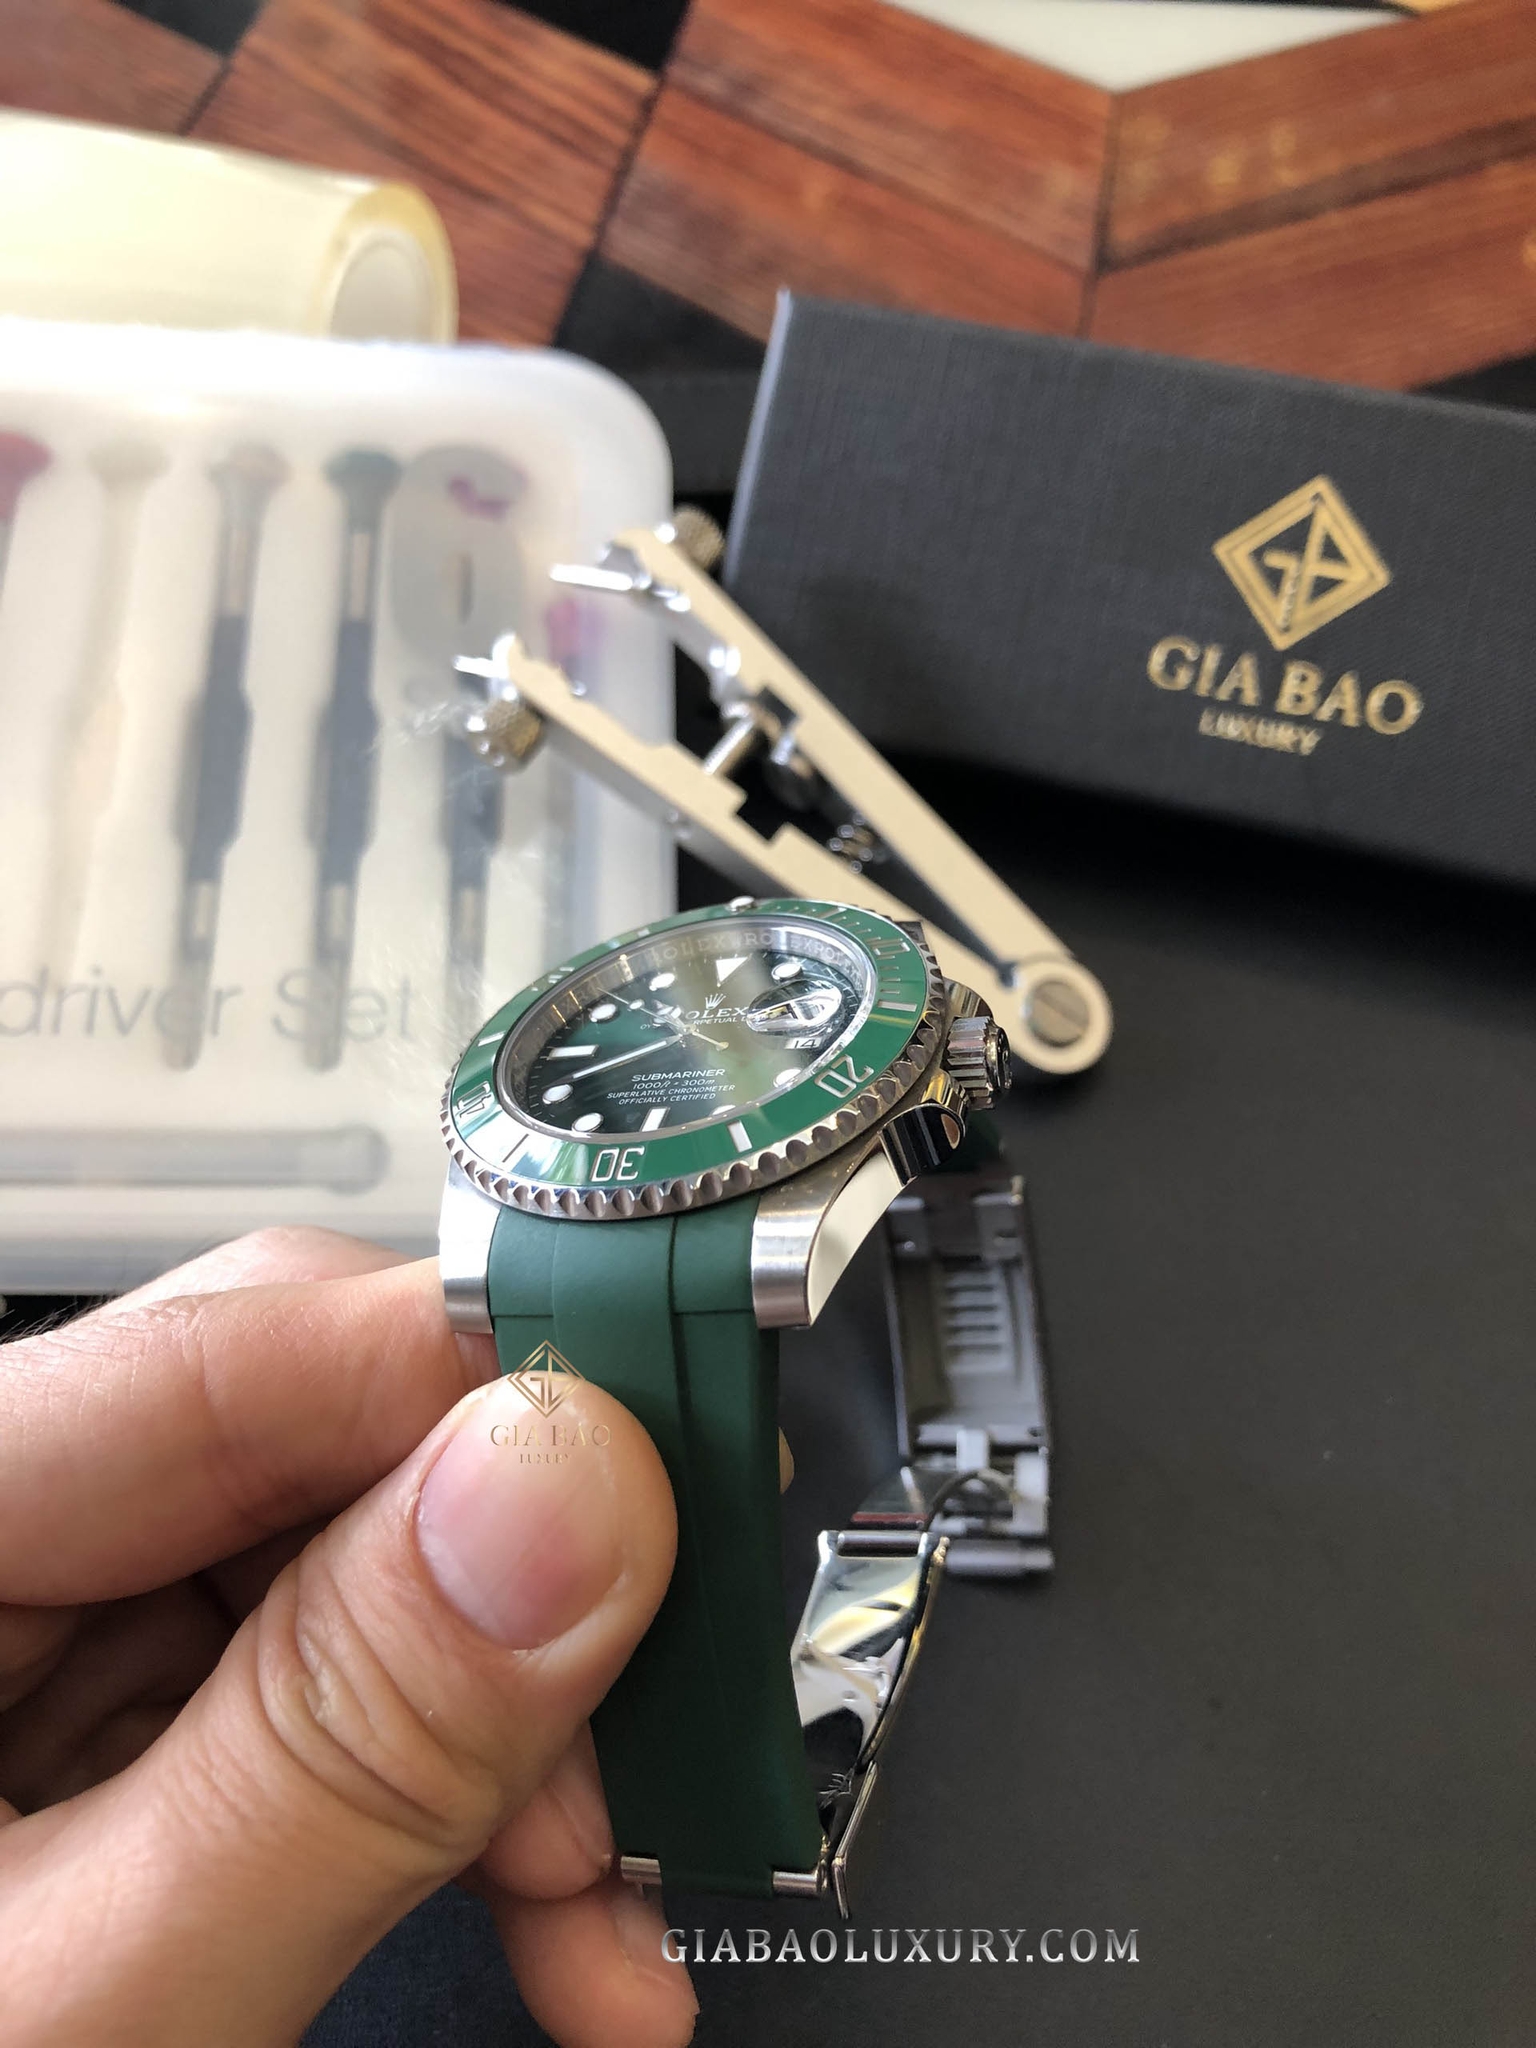 Dây cao su Rubber B cho đồng hồ Rolex Submariner Ceramic 126610 - Tang Buckle Series